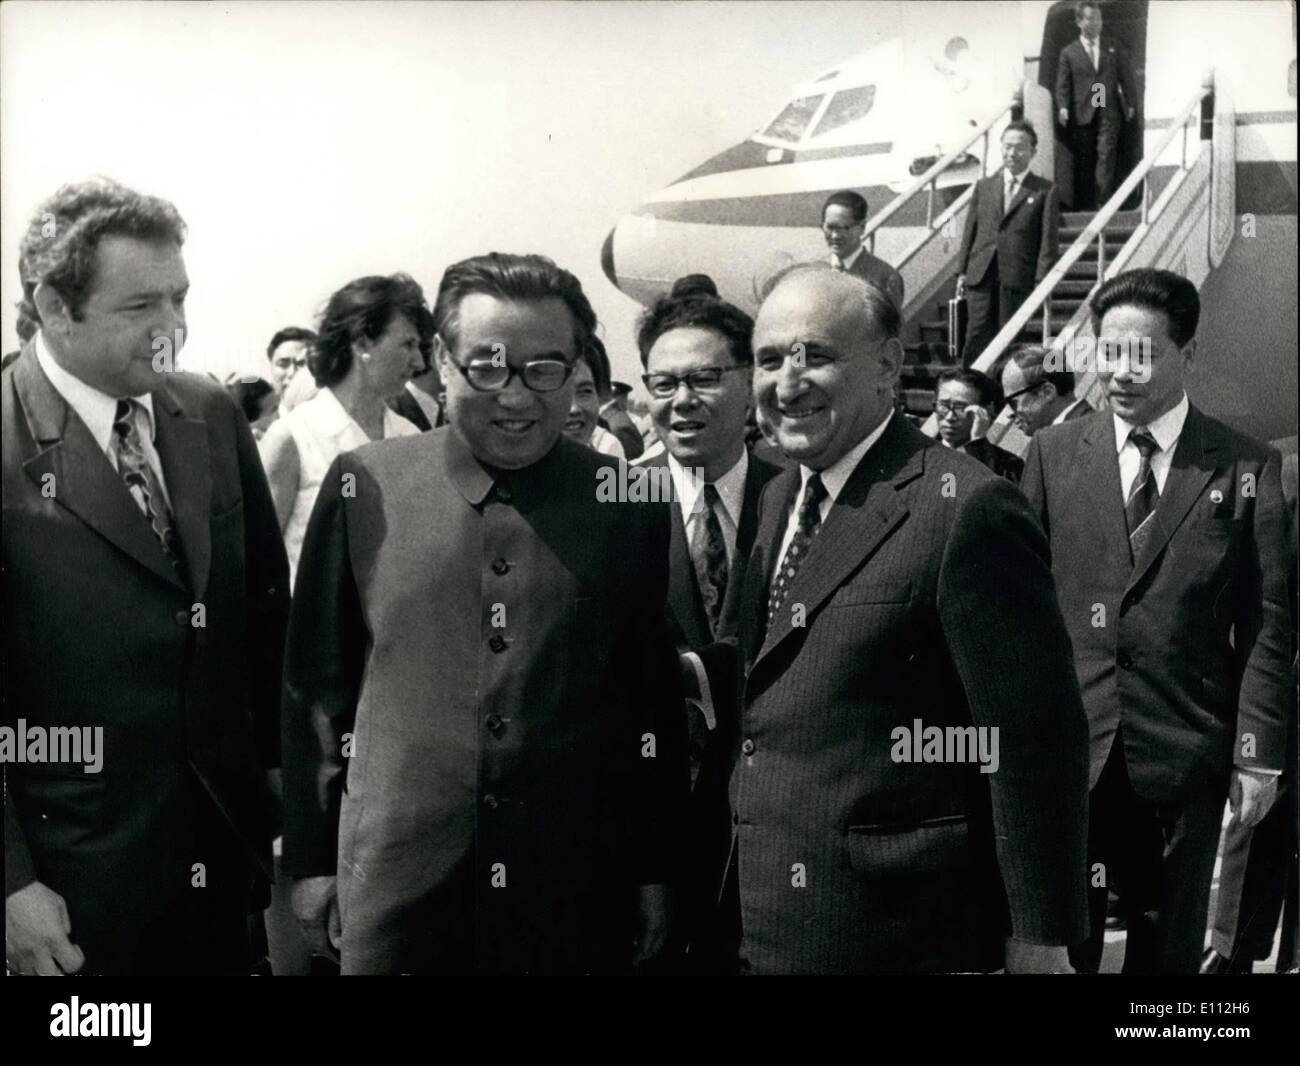 Jun. 06, 1975 - Kim Il Sung visits Bulgaria. Photo shows the first secretary of the Bulgarian Communists Party Central Committeee and president of the State Council of Bulgaria Todro Zhivkov and the Secretary general of the Central Committeee of the Korean Workers party and President of the Korean People's Democratic Republic Kim Il Sung during welcome ceremony at Sofia Airport. Stock Photo